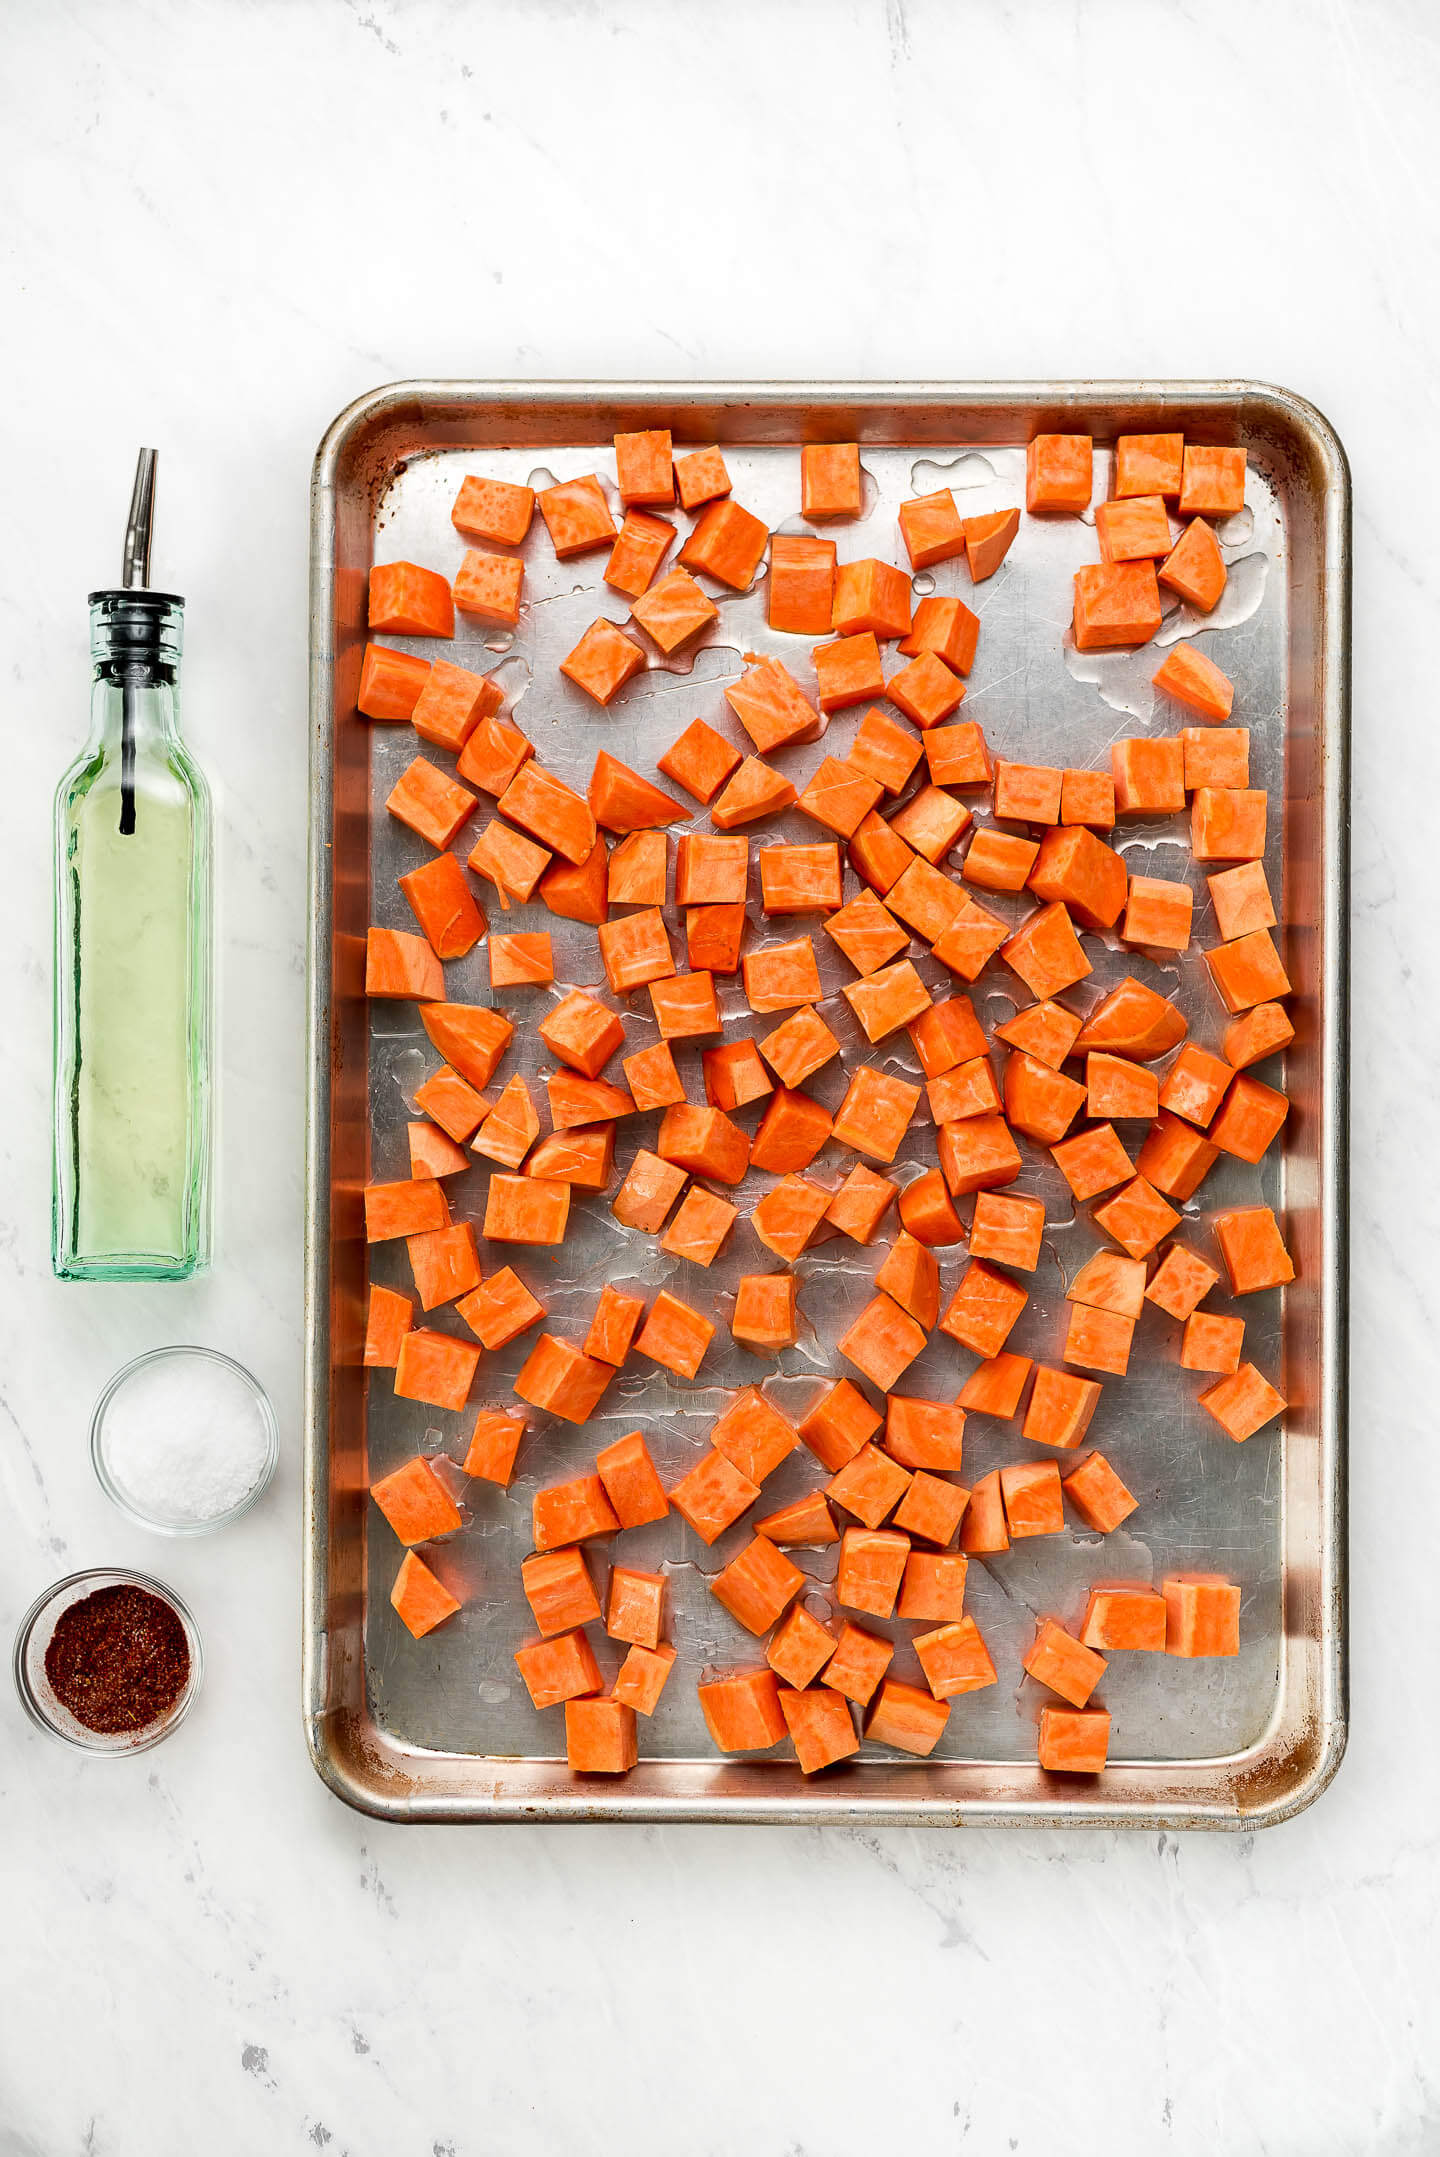 Cubed raw sweet potatoes on a baking sheet drizzled with olive oil and seasonings in small bowls to the side.